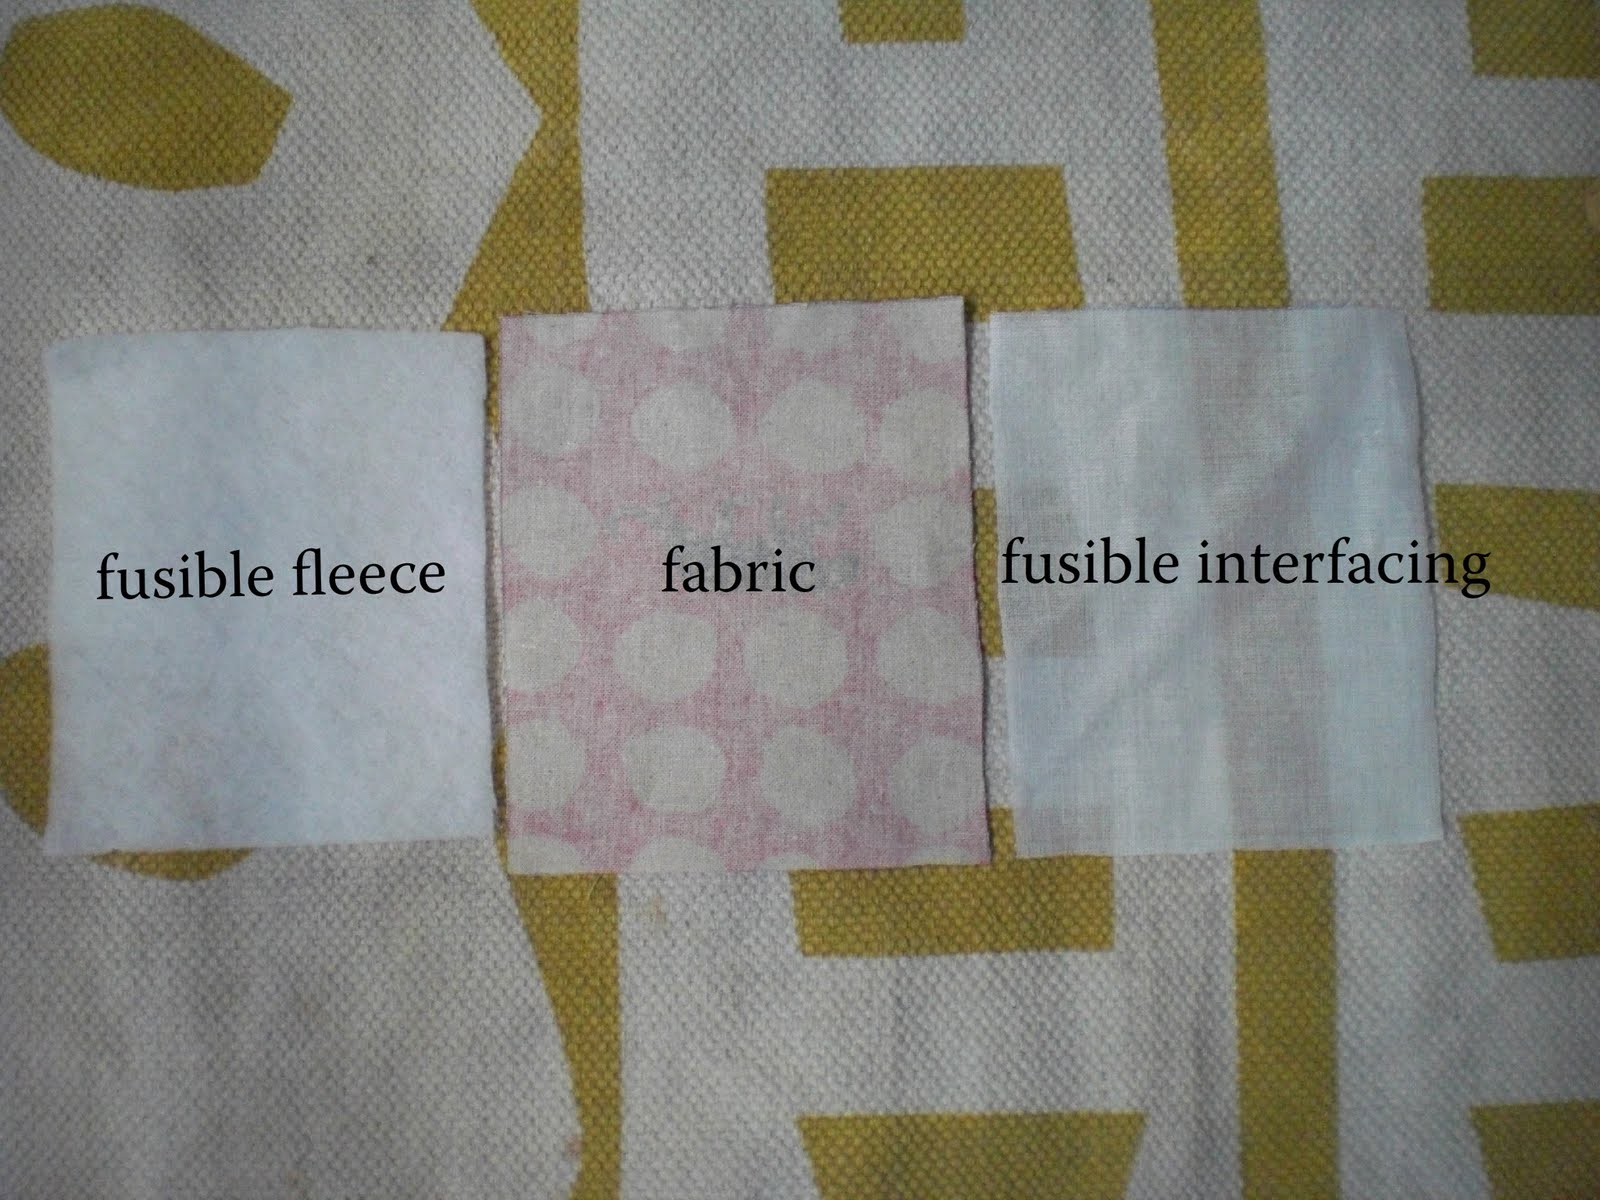 Projects by Jane: This is how I fuse interfacing and fleece to fabric